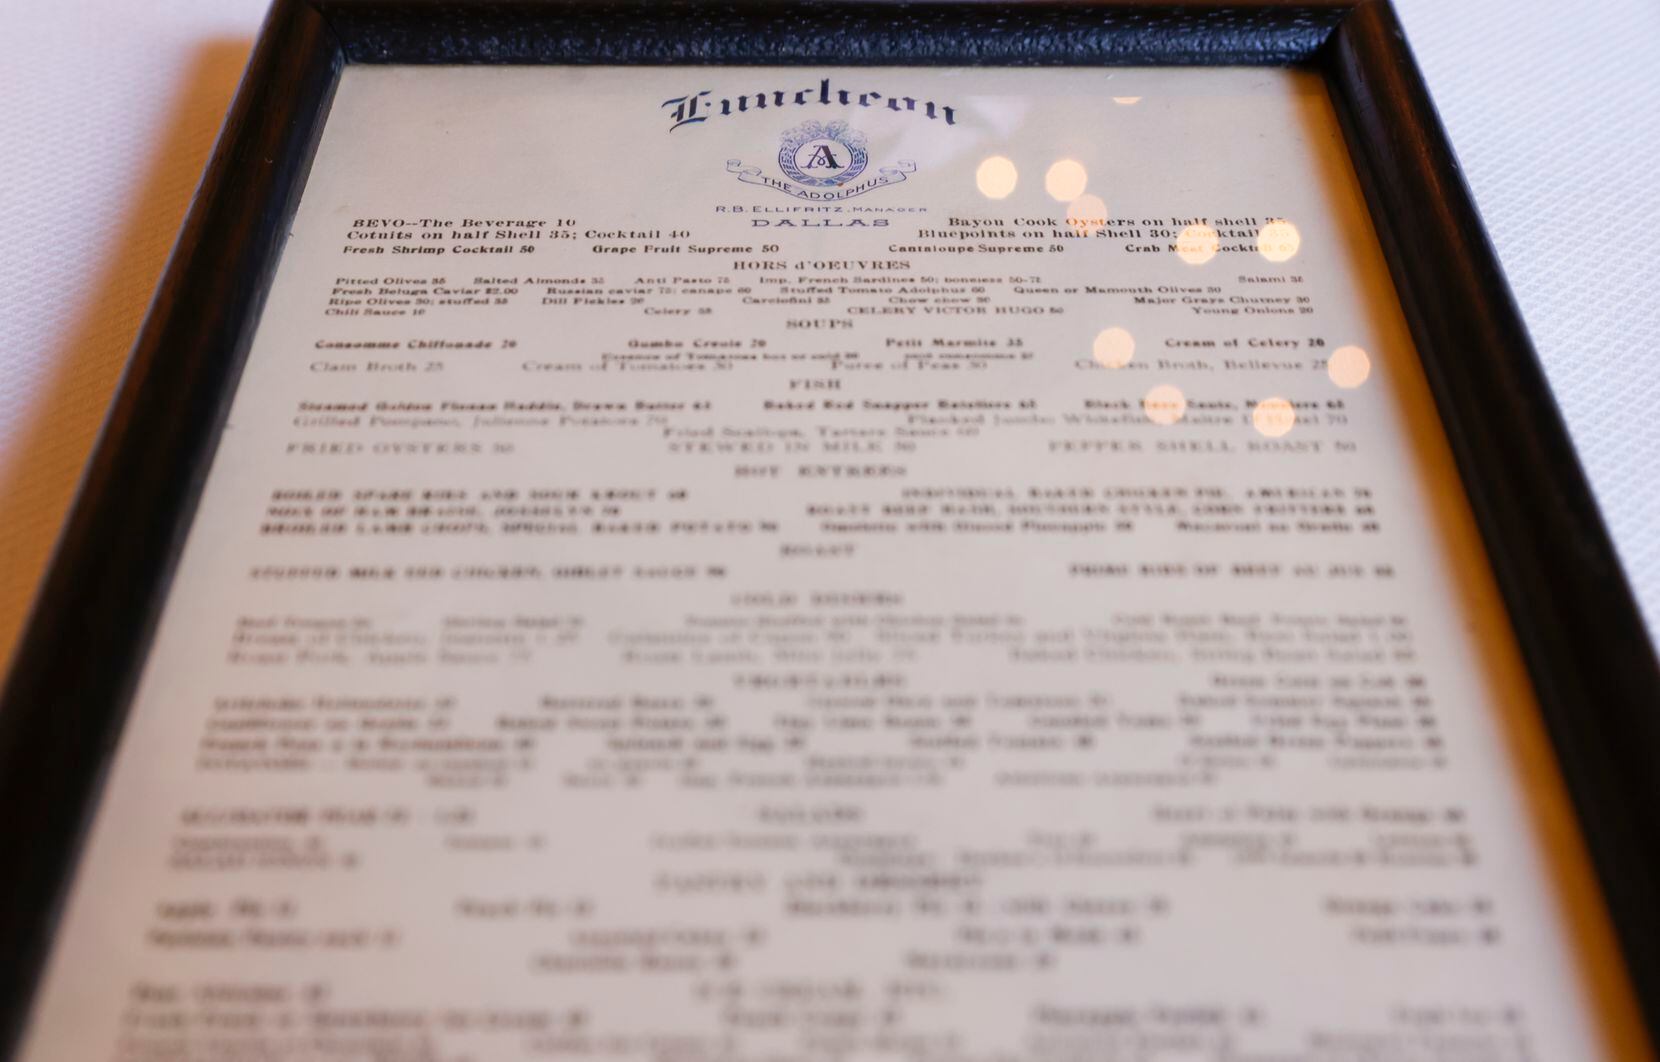 A framed archived luncheon menu at the Adolphus Hotel in Dallas on Thursday, Oct. 13, 2022.